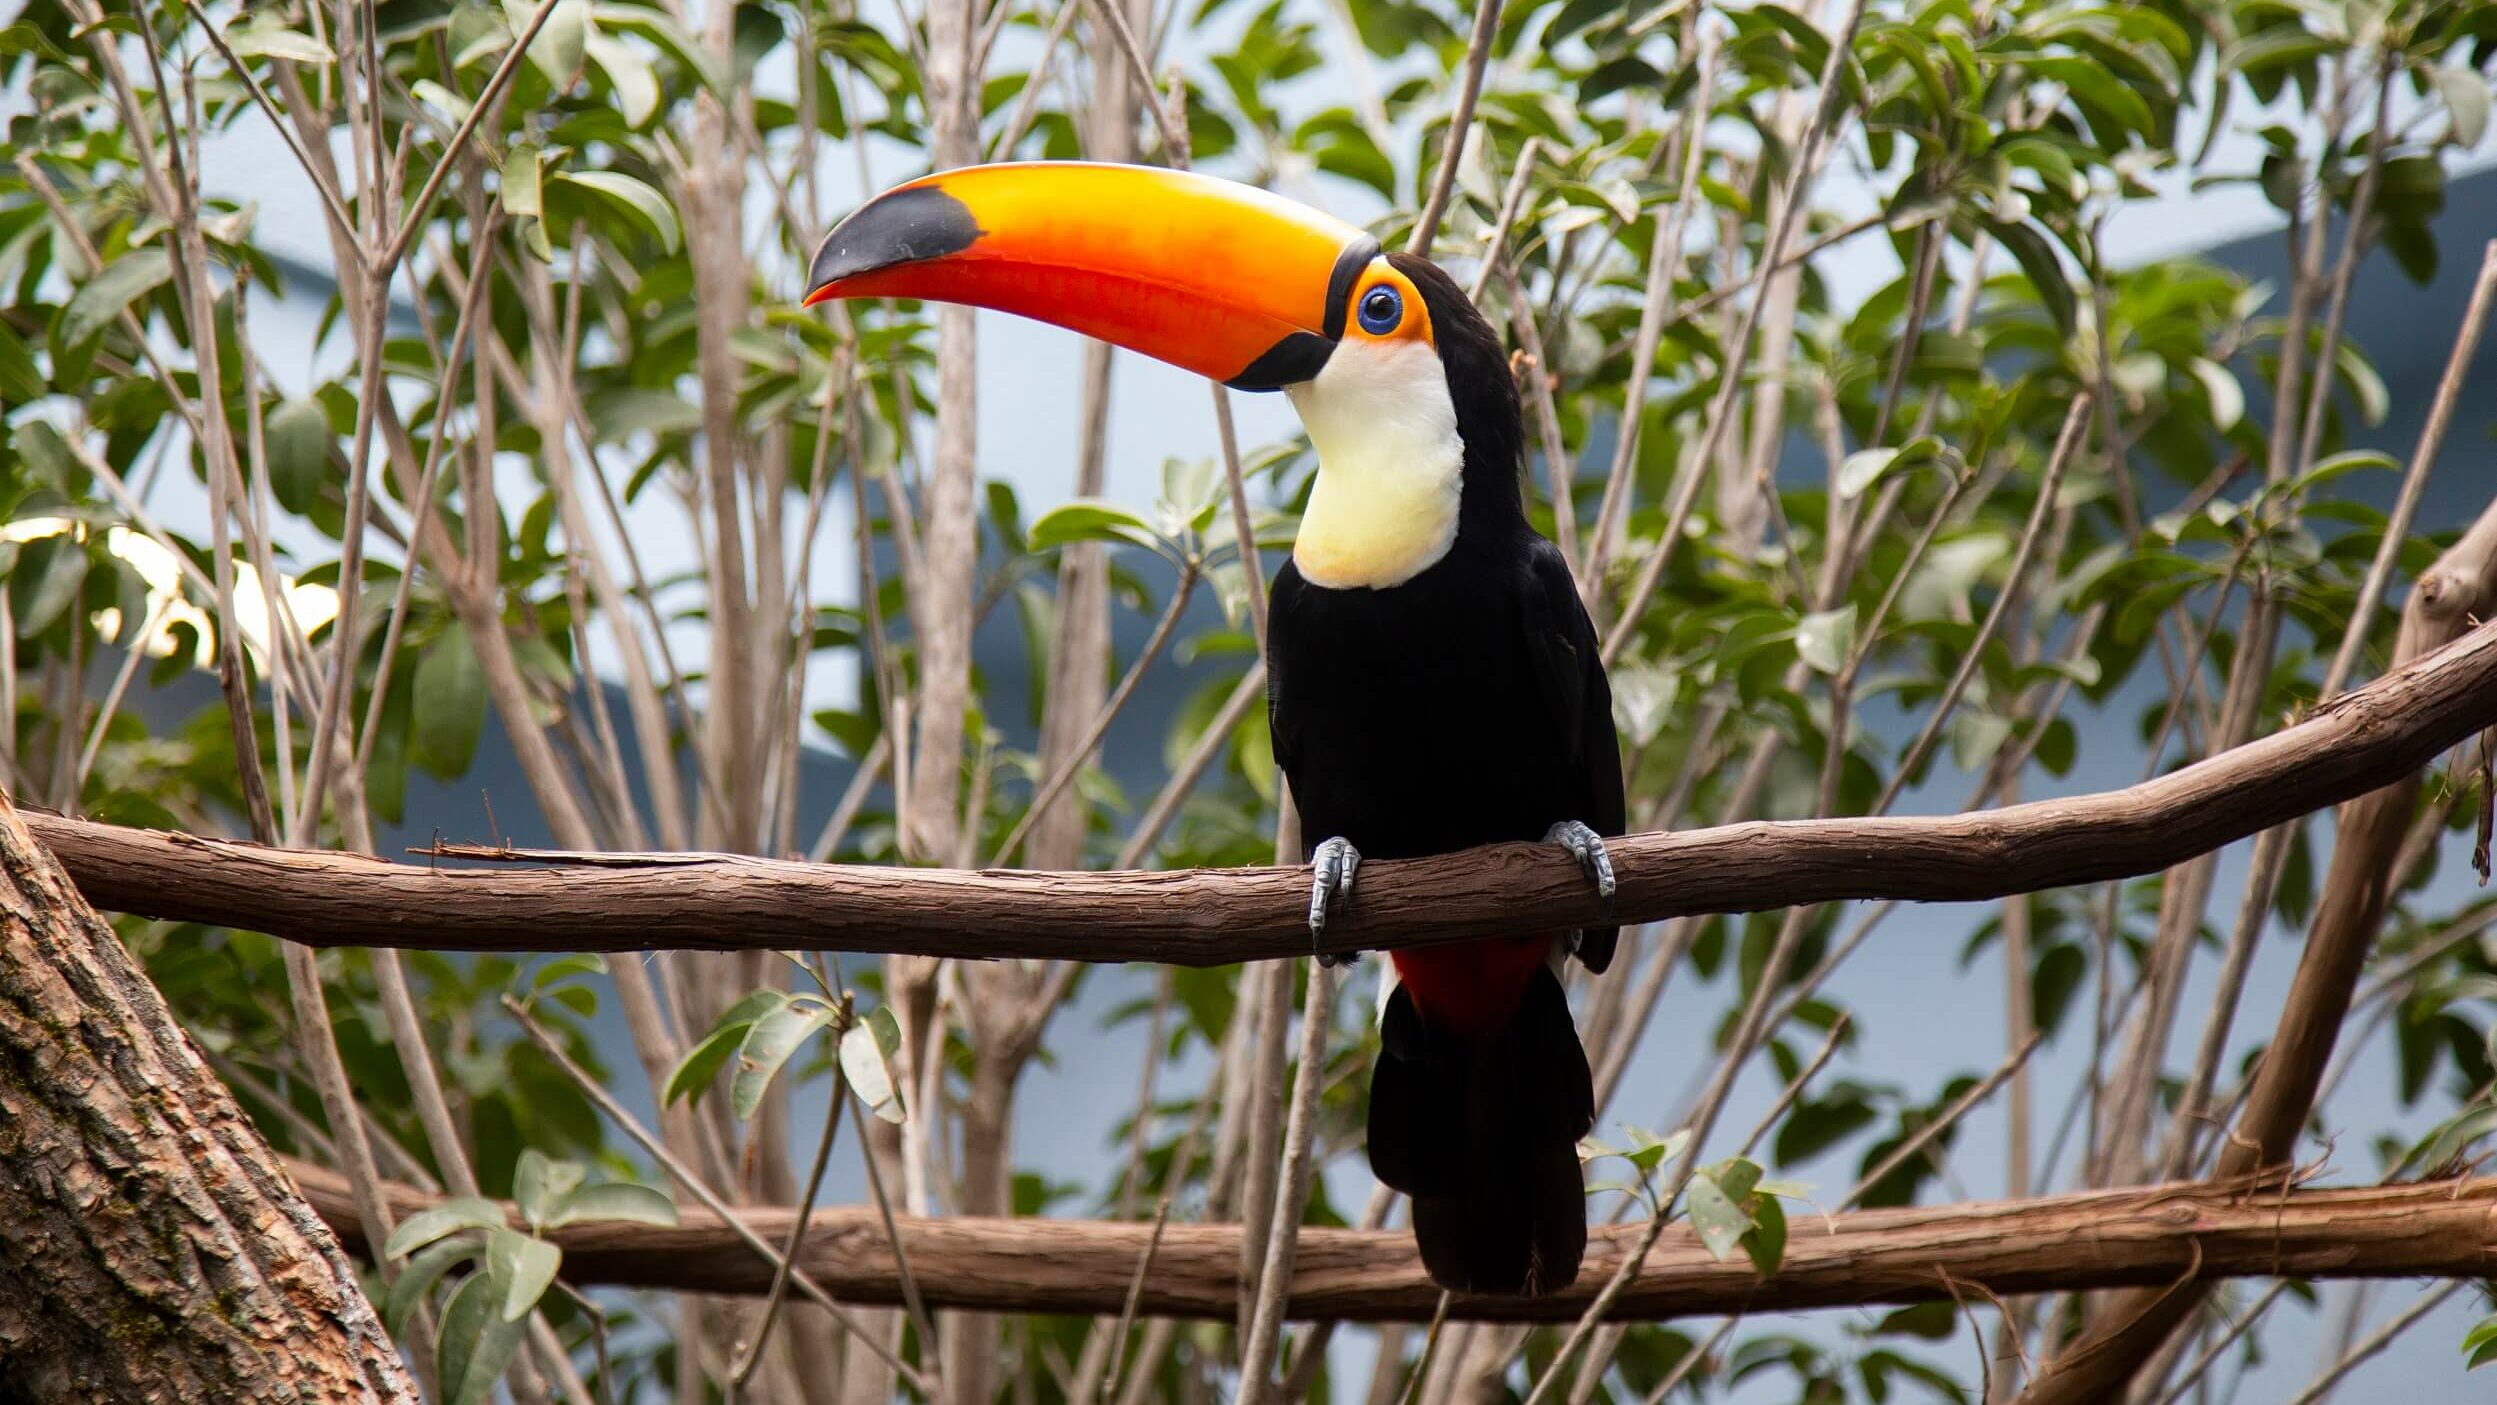 Toco Tucan perched on a branch